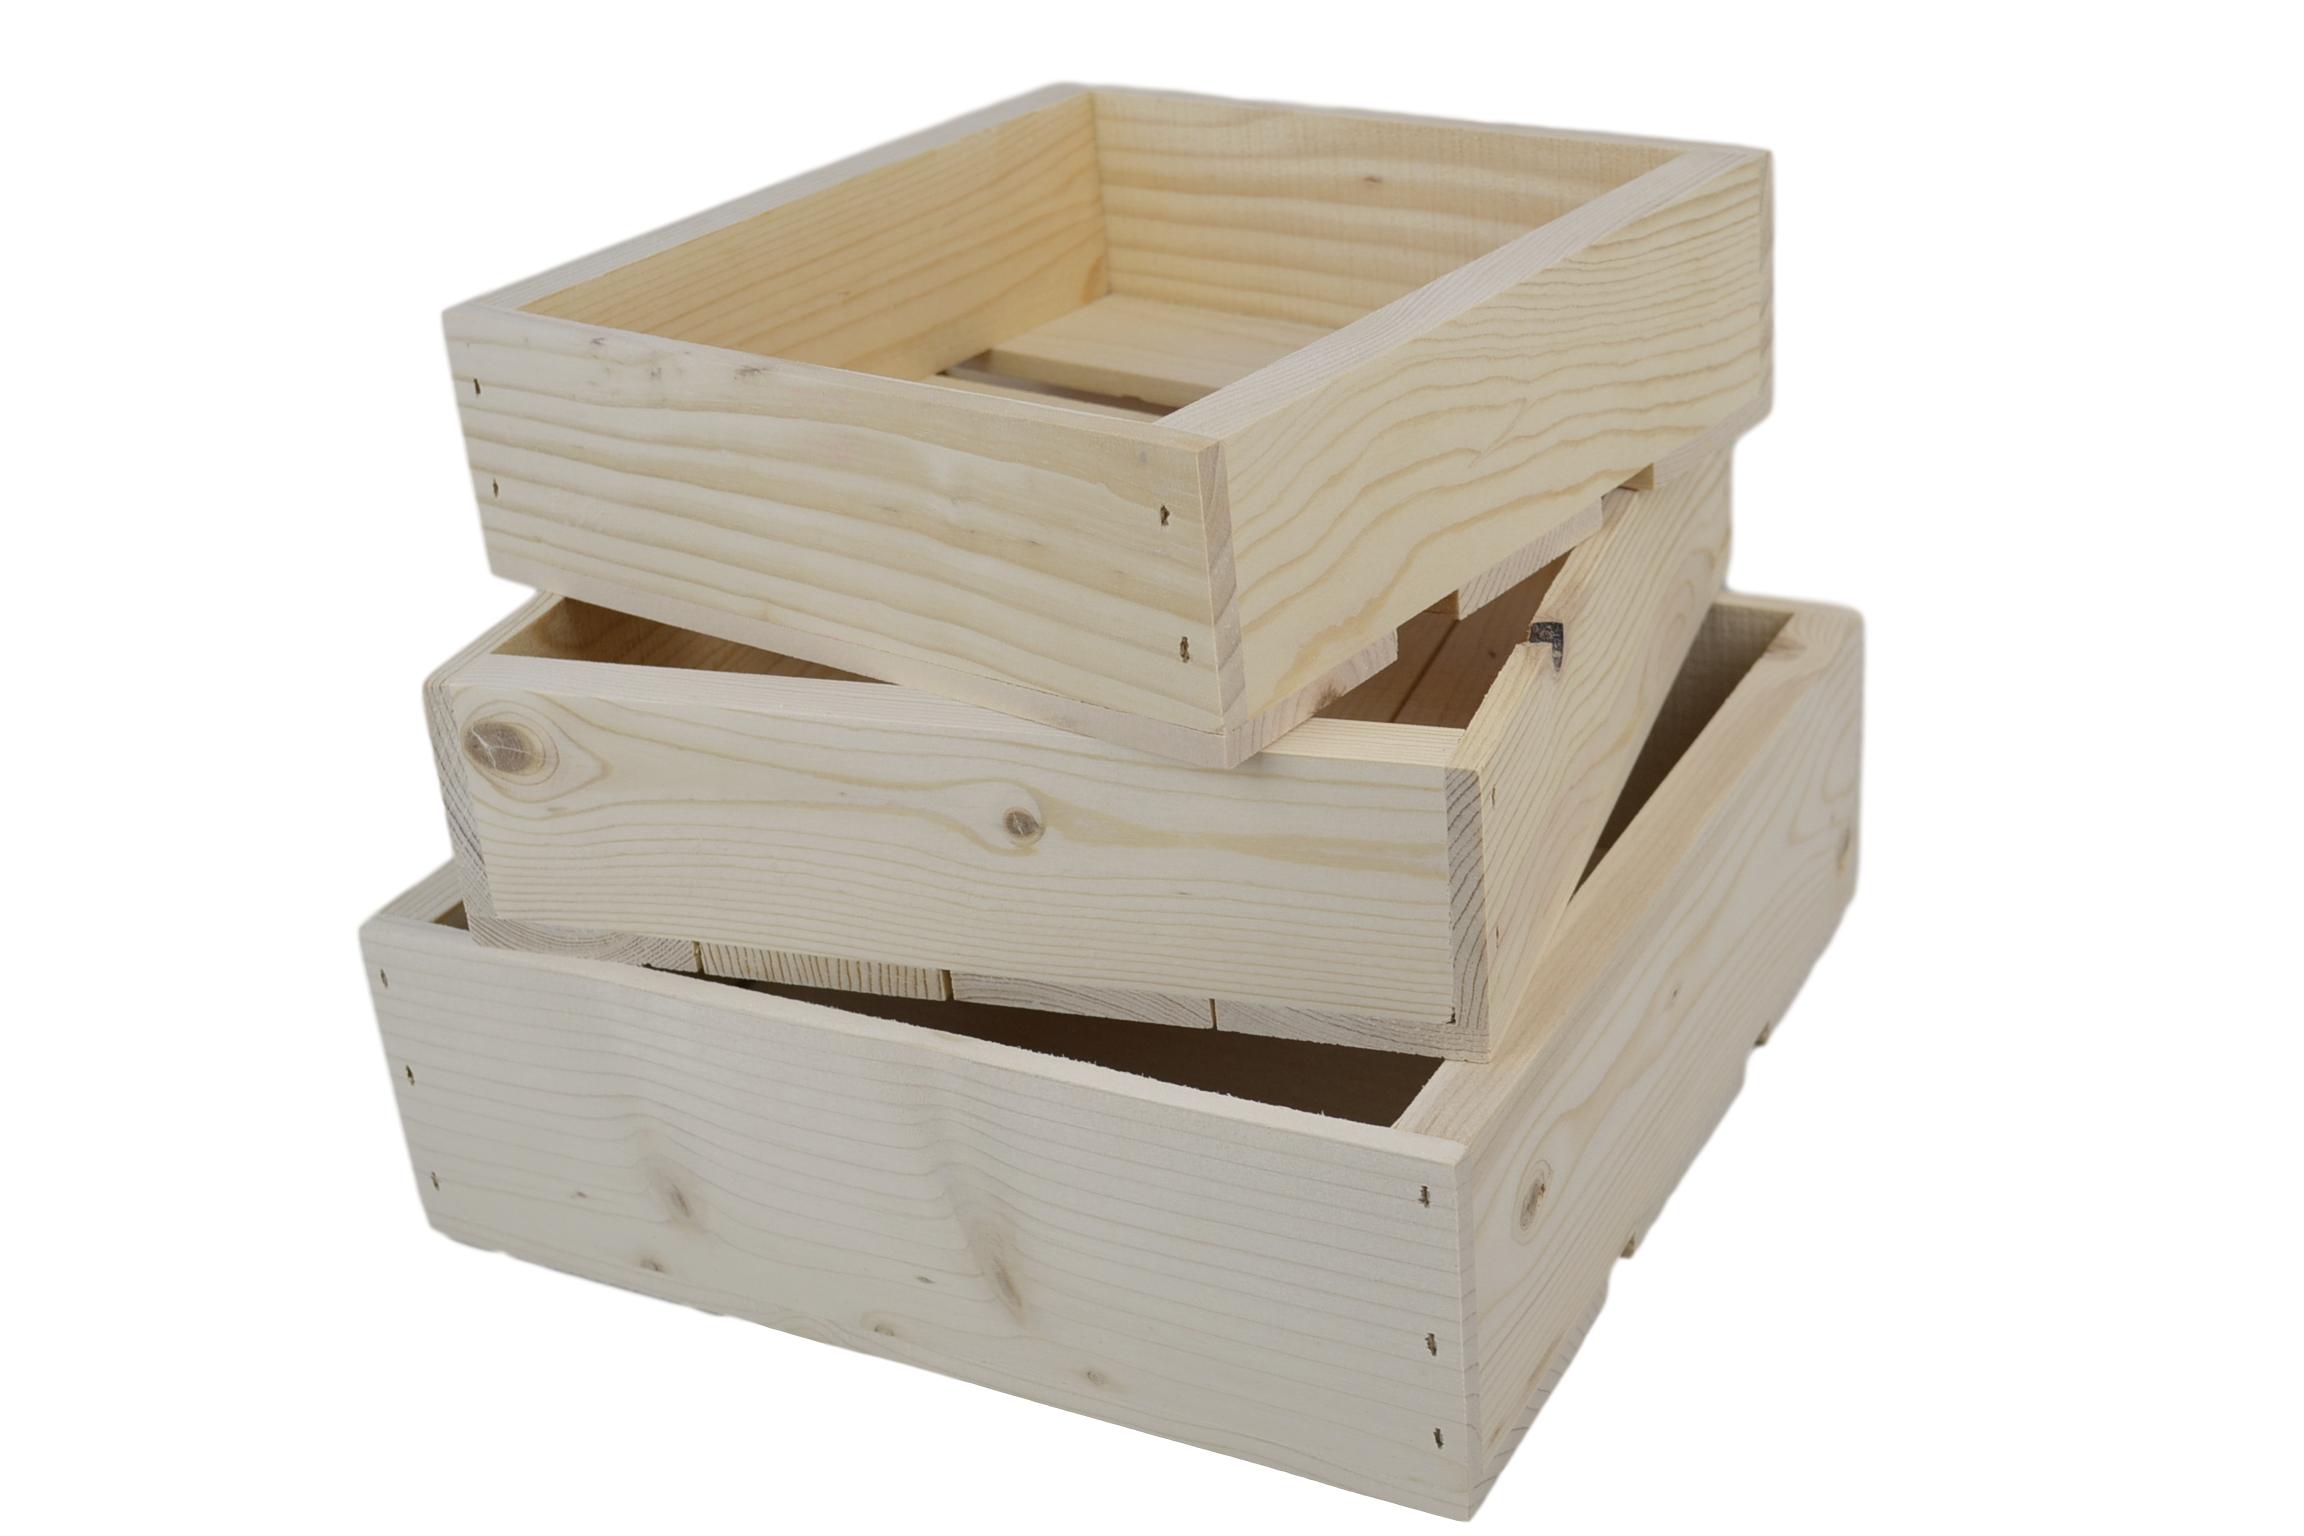 3 Piece Wooden Nesting Boxes Free, Wooden Nesting Boxes